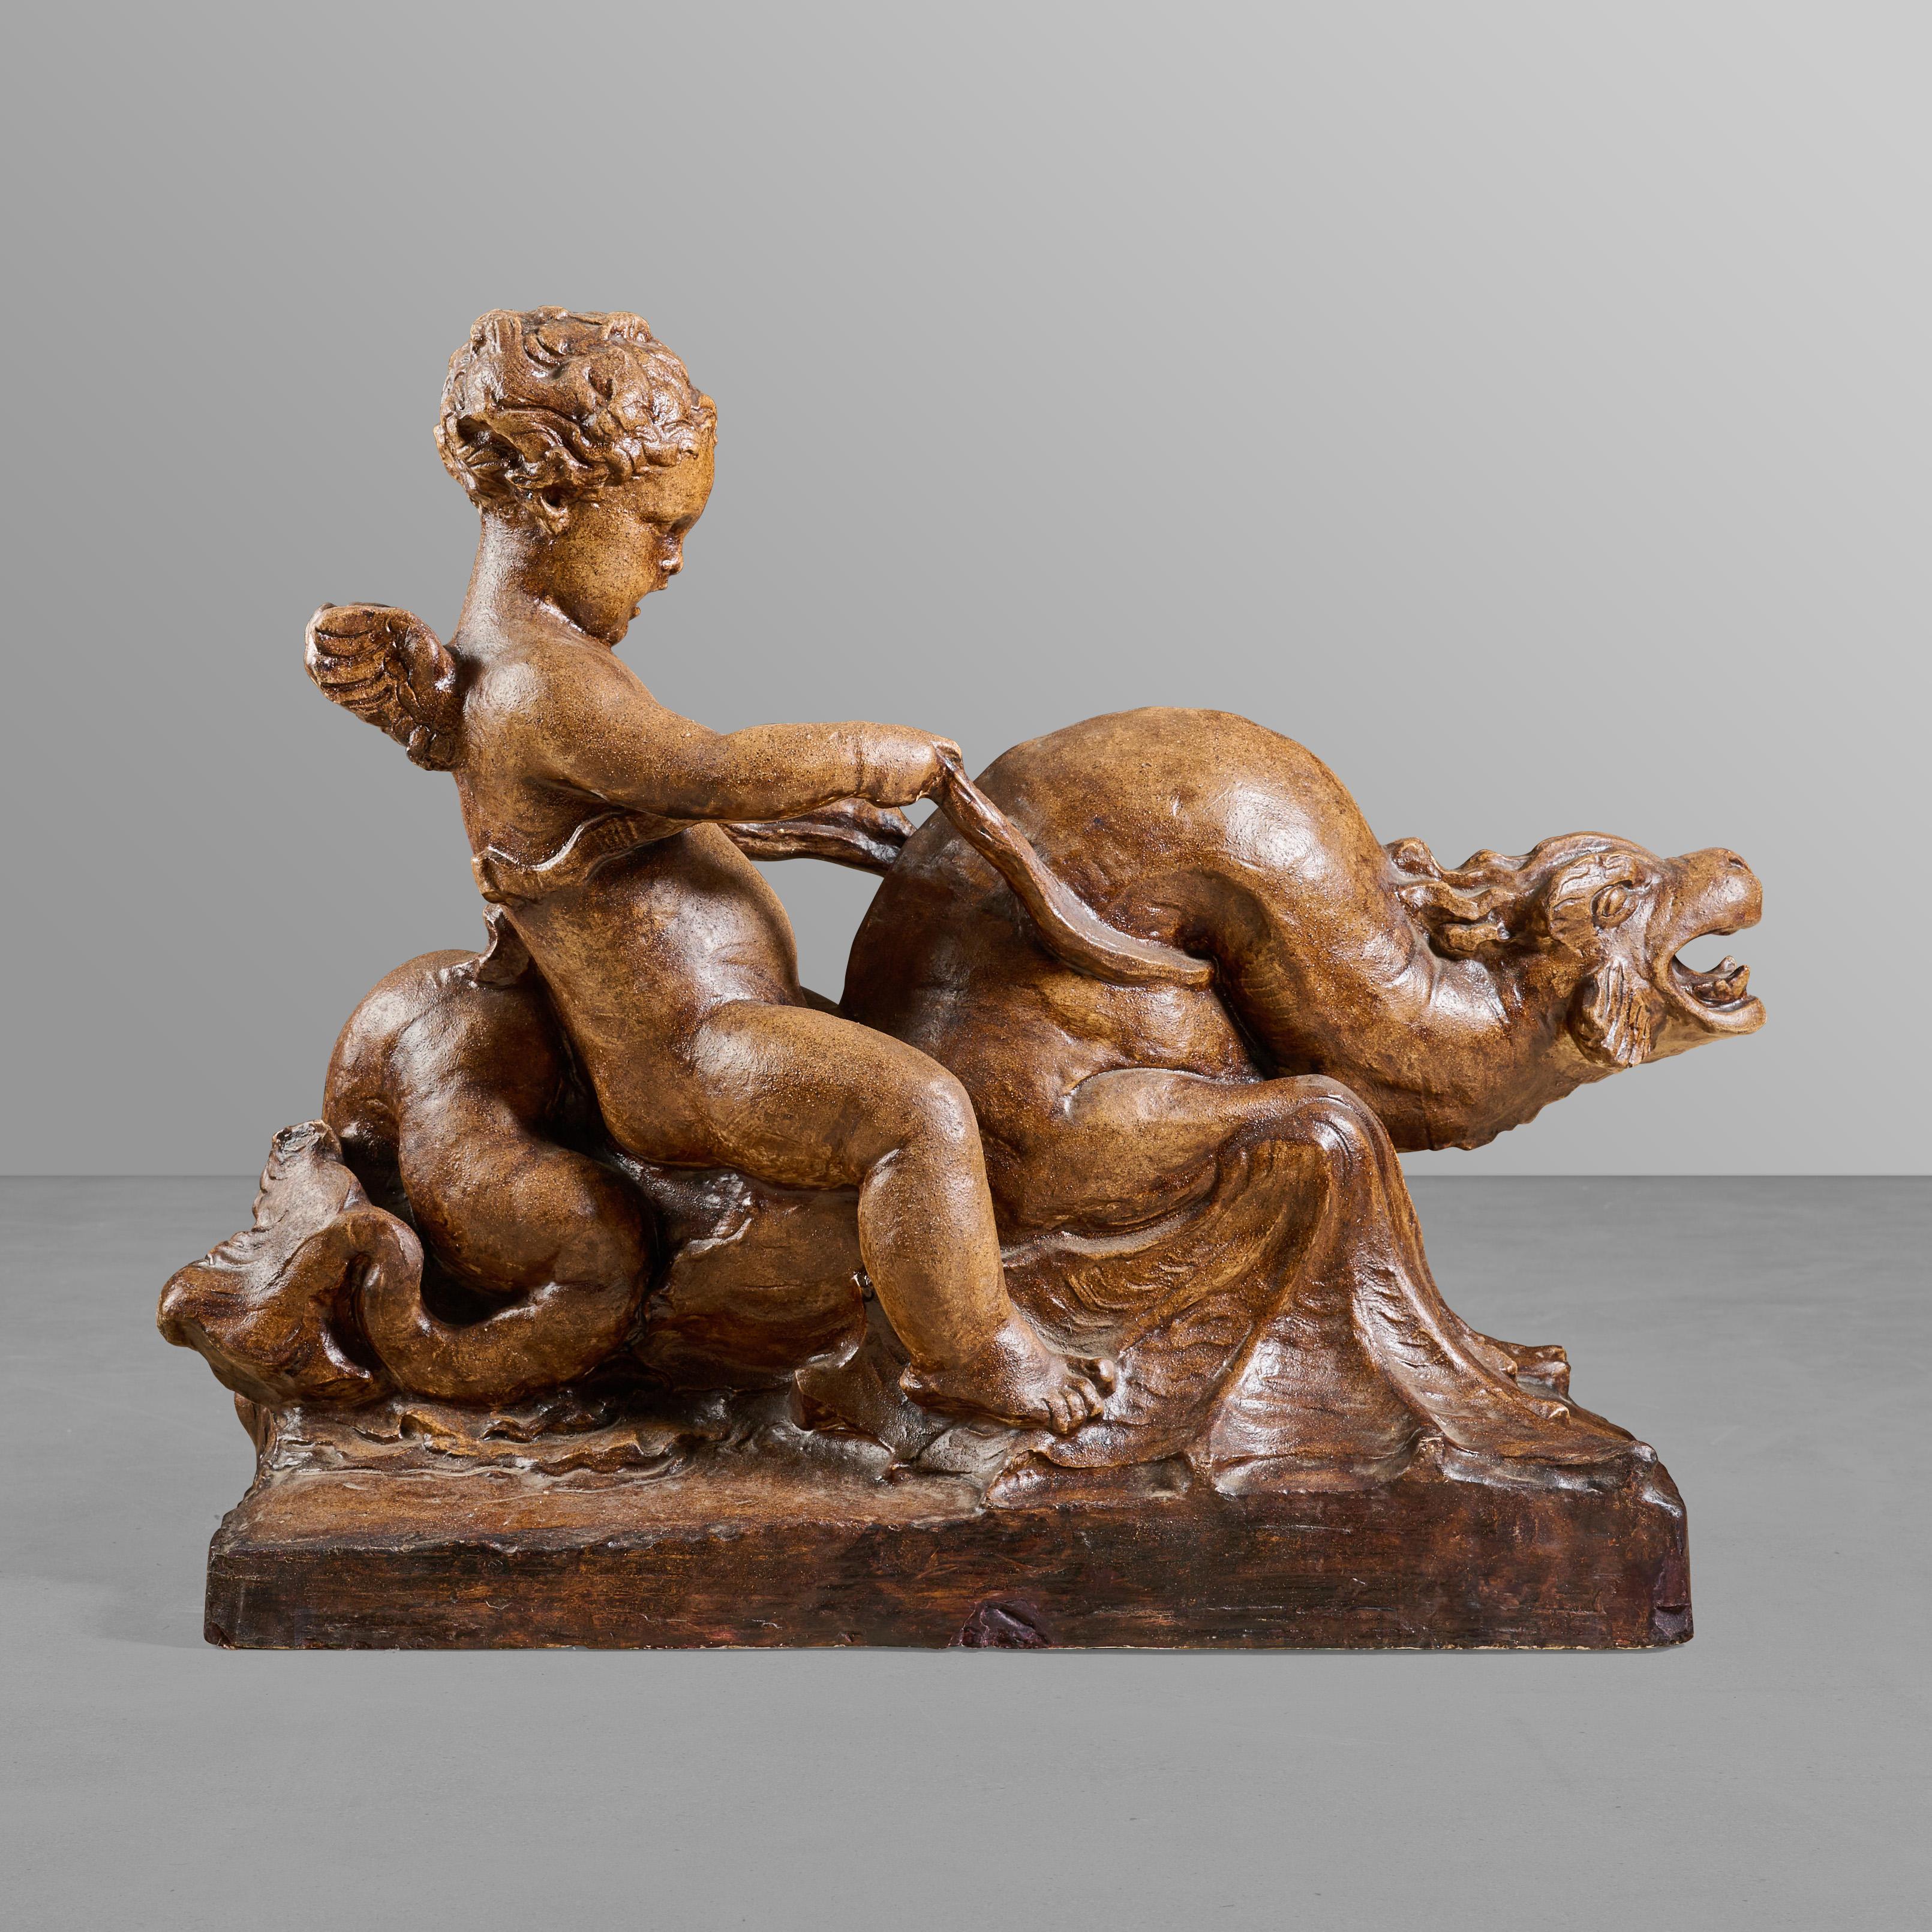 Composition maquette for a fountain. Putti/angel riding a mythical sea creature. This maquette was used to model the bronze castings for a fountain.